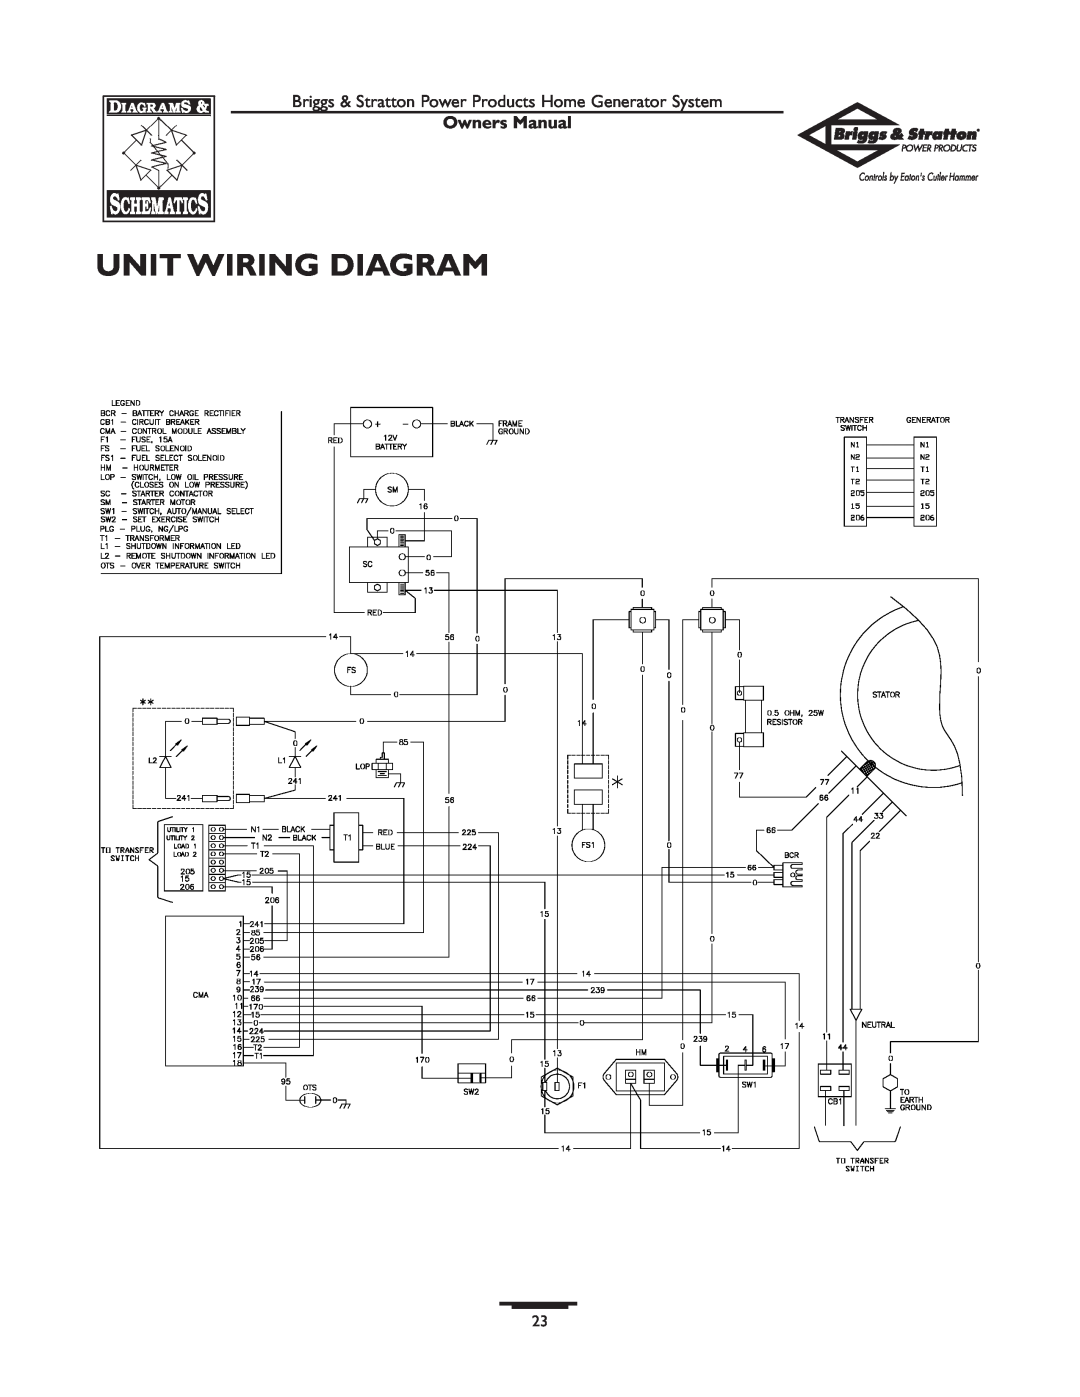 Briggs & Stratton 1679-0 owner manual Unit Wiring Diagram, Owners Manual 